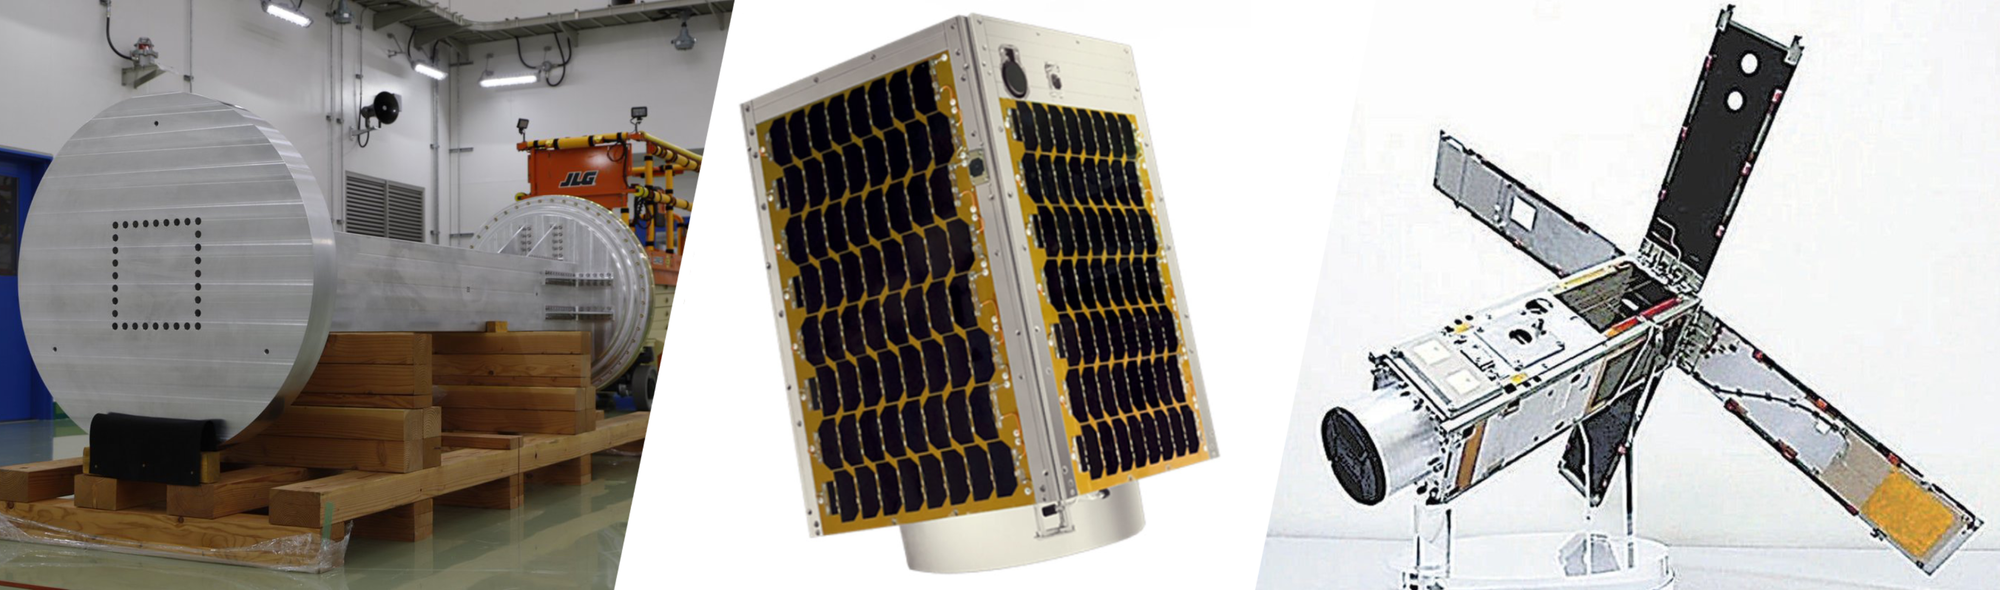 VEP-4 (left), CE-SAT-1E render (center), and a model of TIRSAT (right).